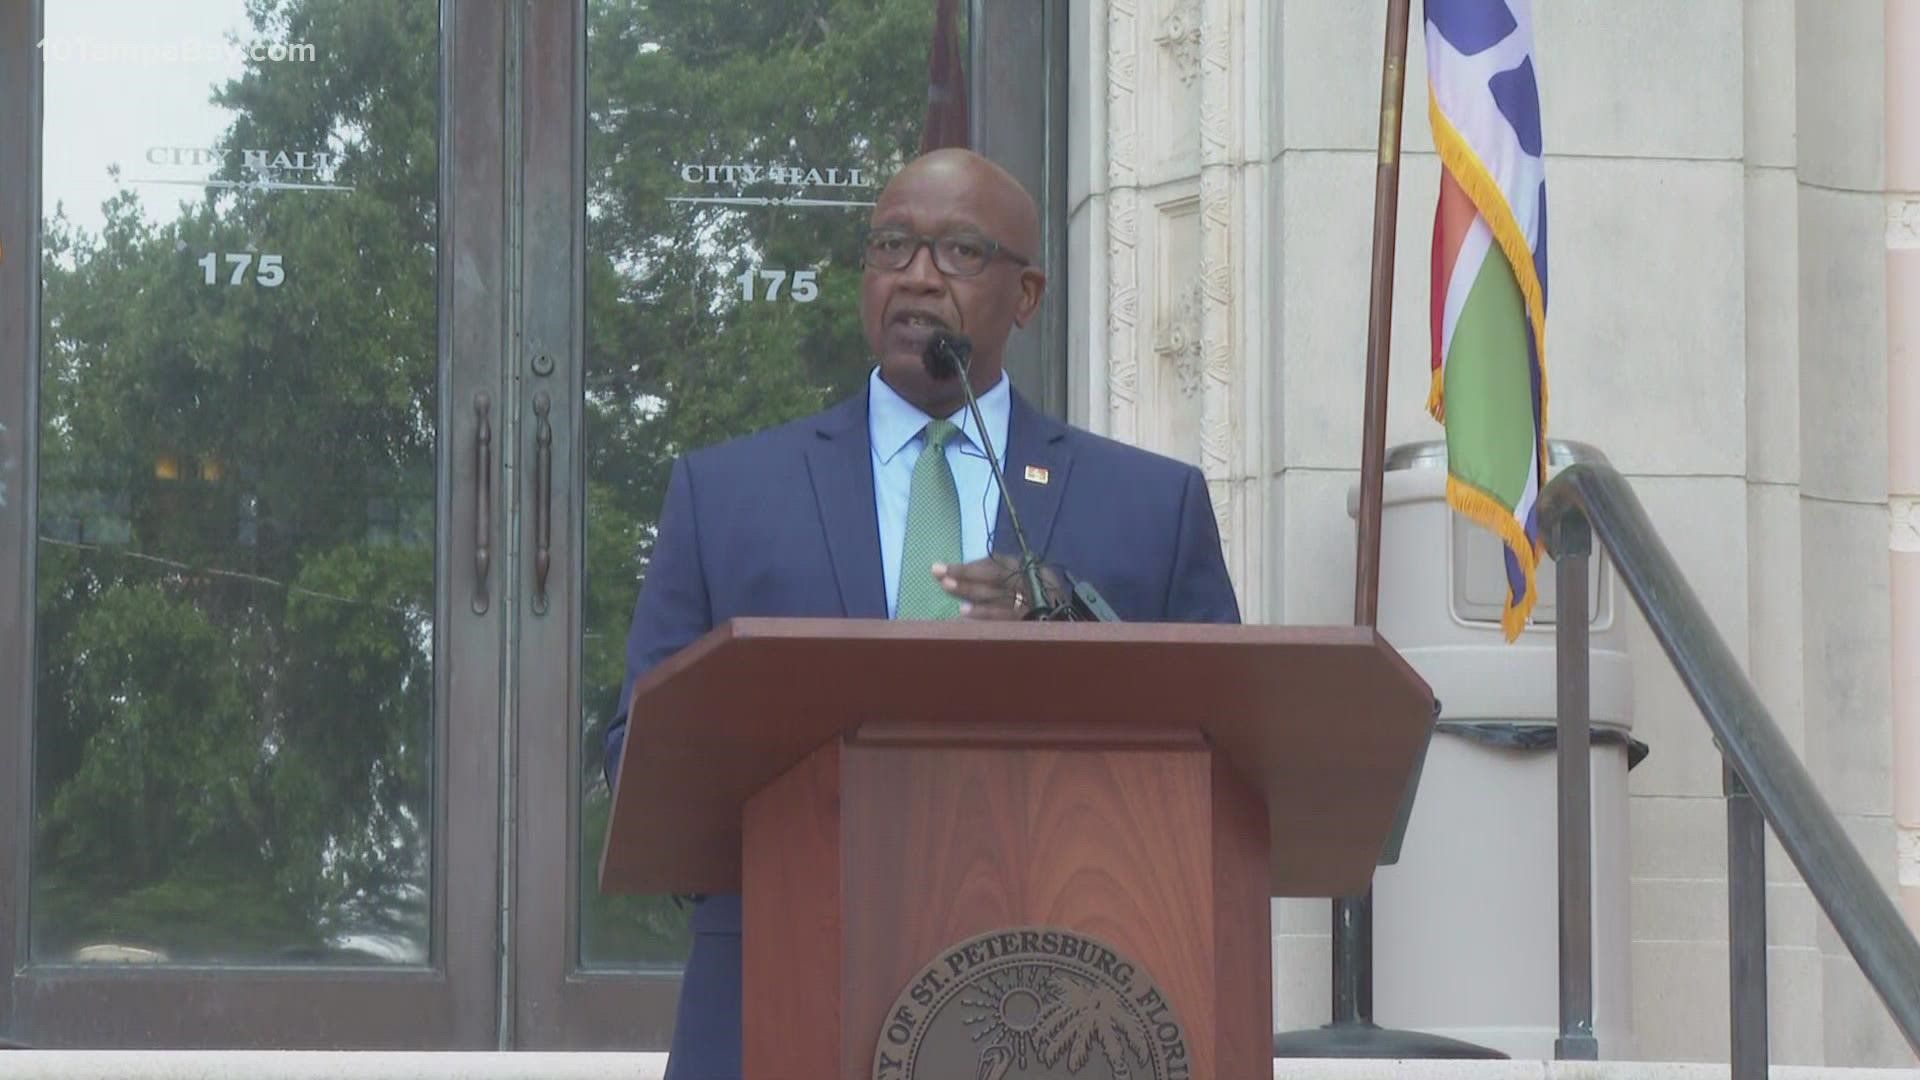 Welch was sworn in on Jan. 6 as the city's first Black mayor.